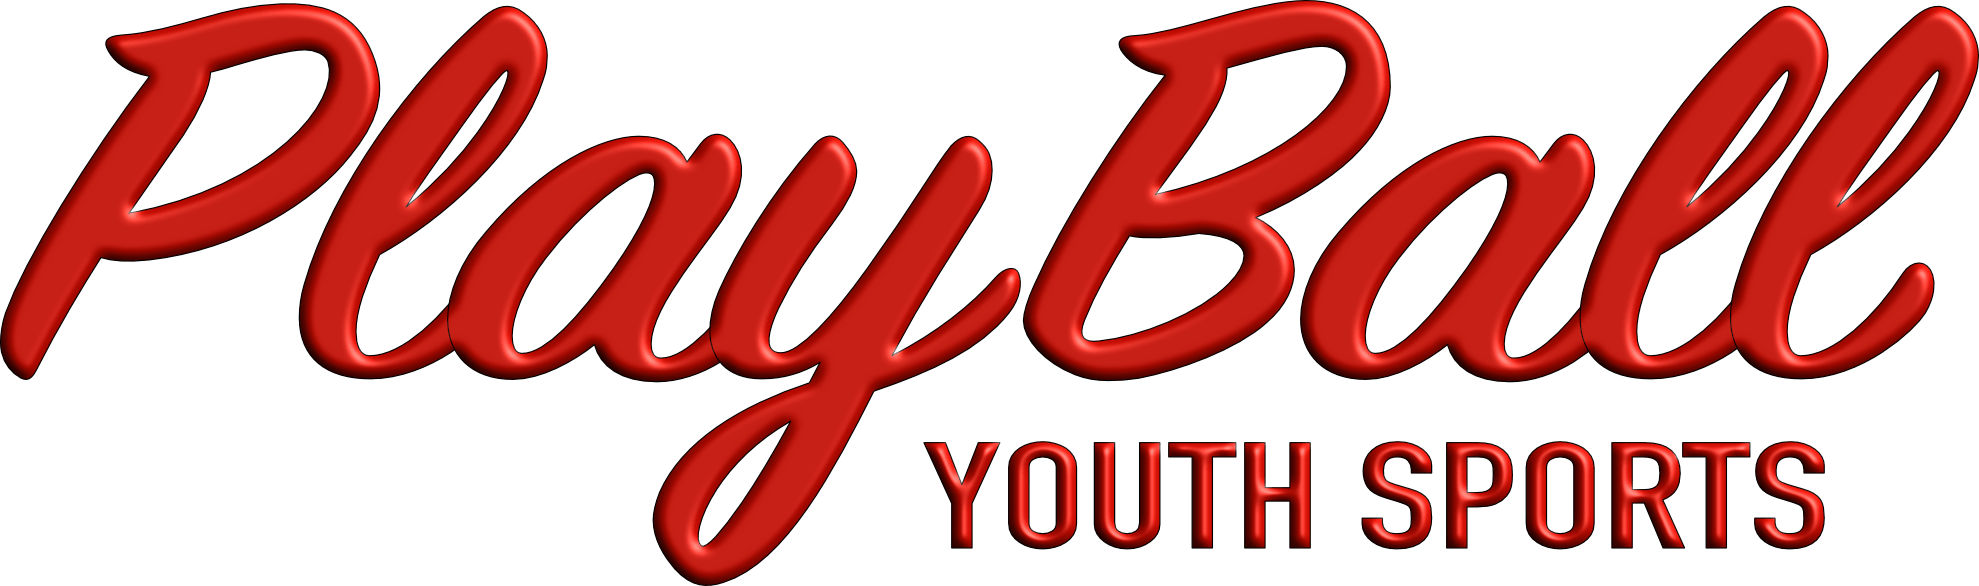 Play Ball Youth Sports